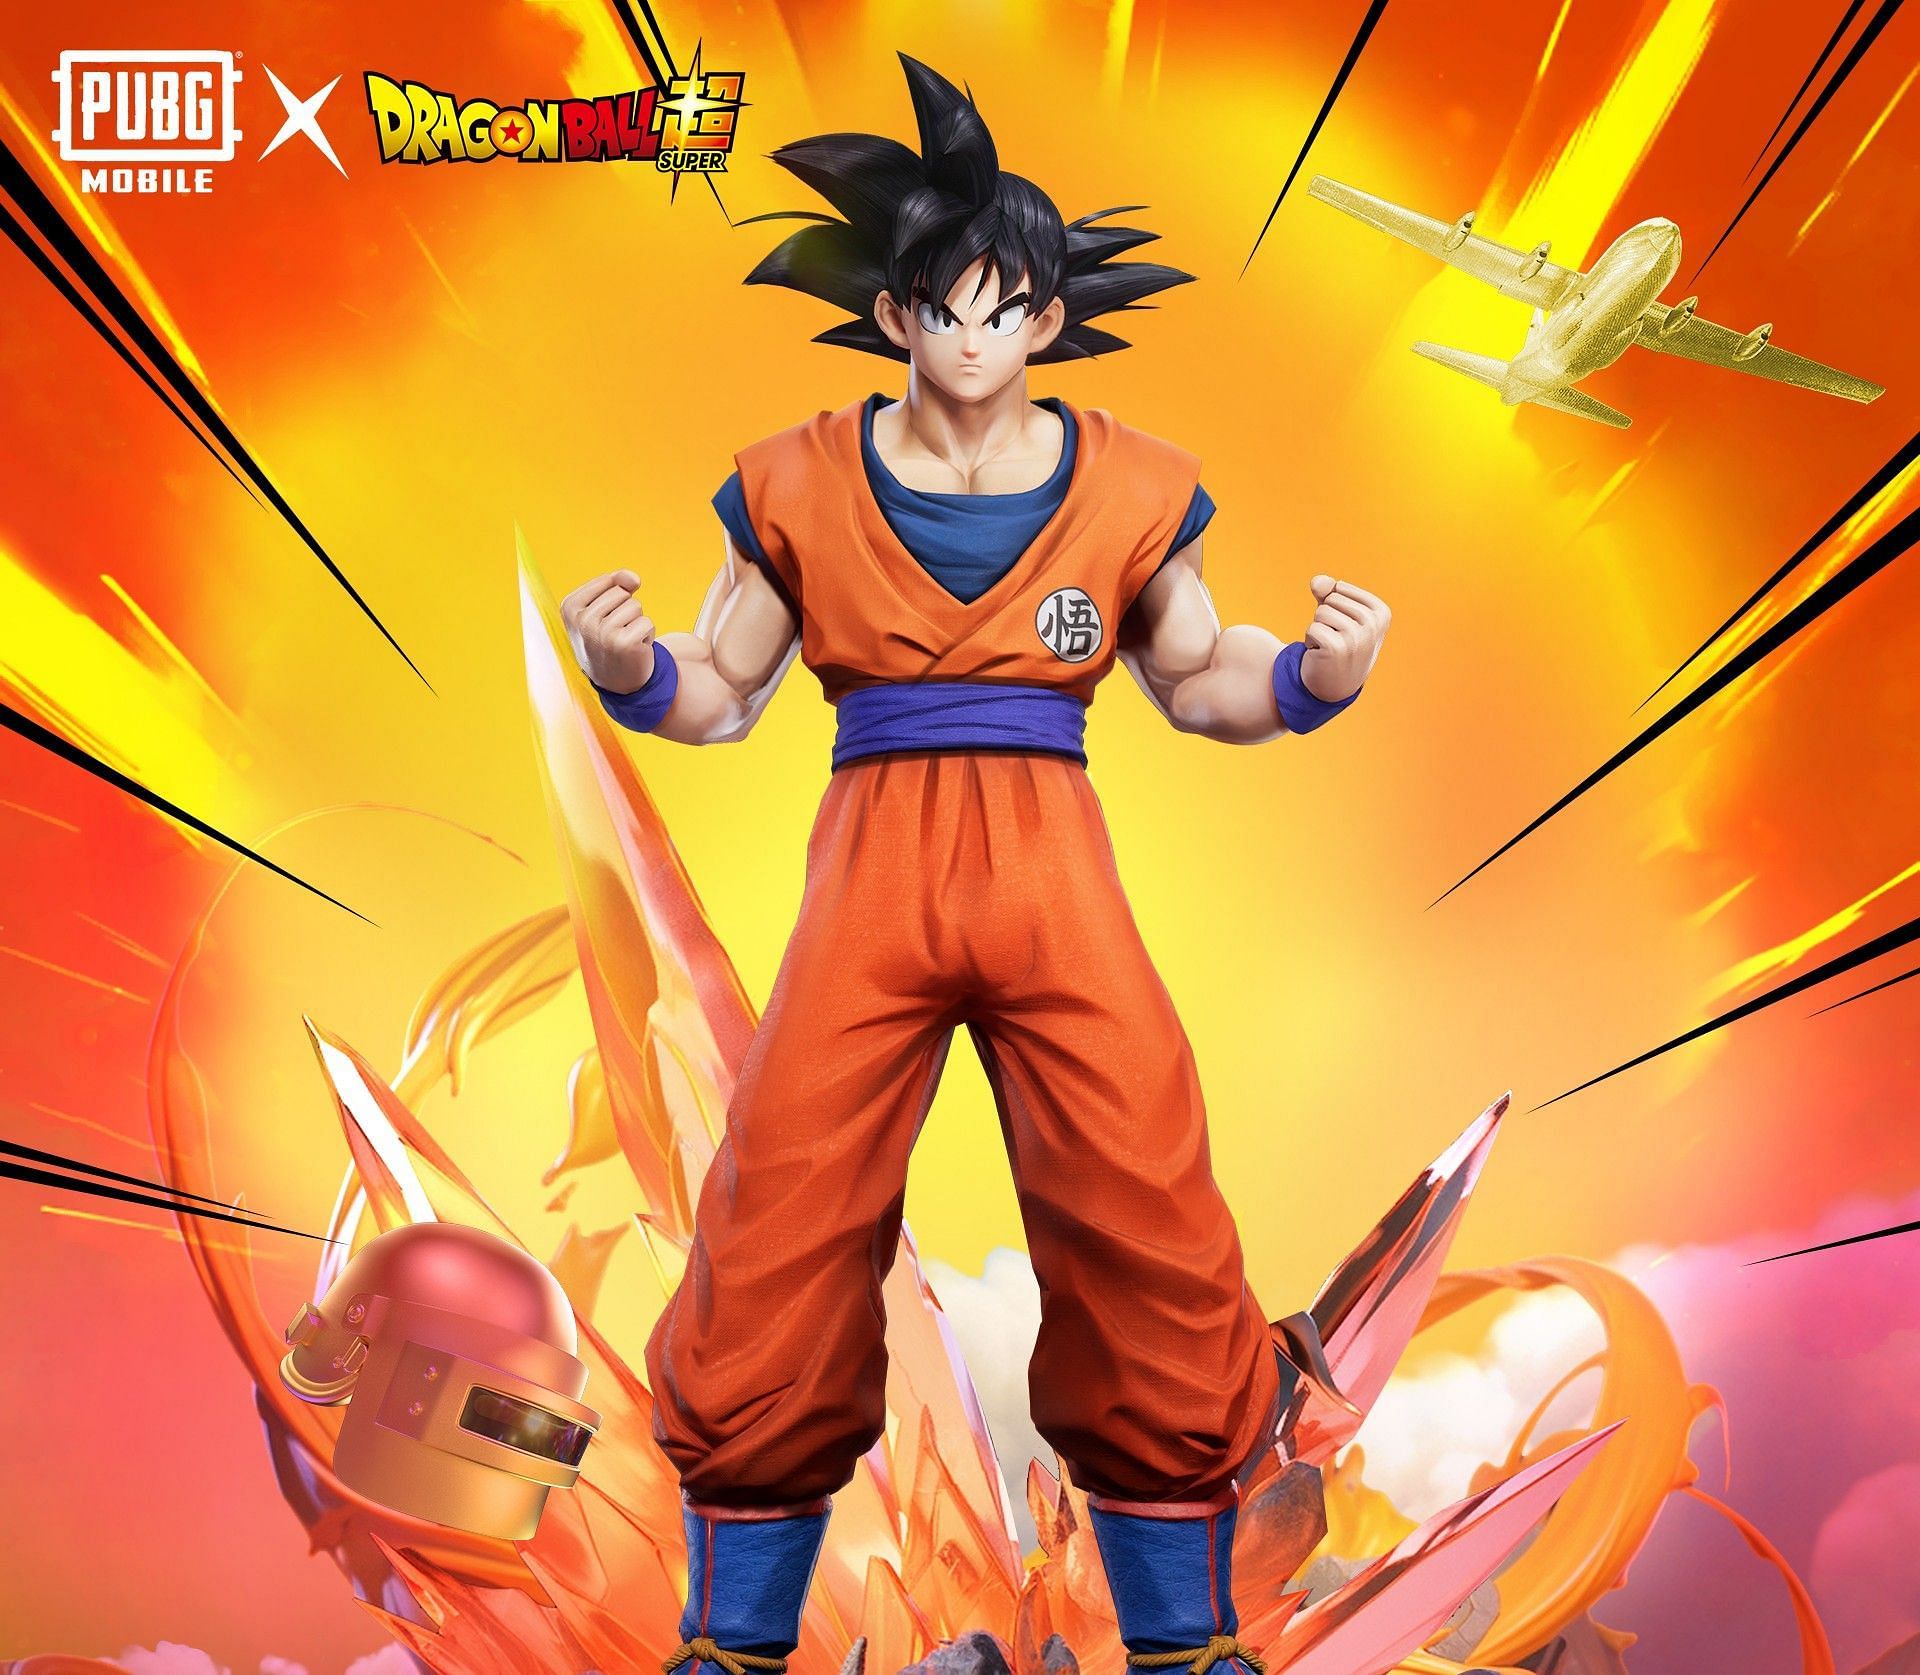 Goku from Dragon Ball Super in the game (Image via Tencent Games)